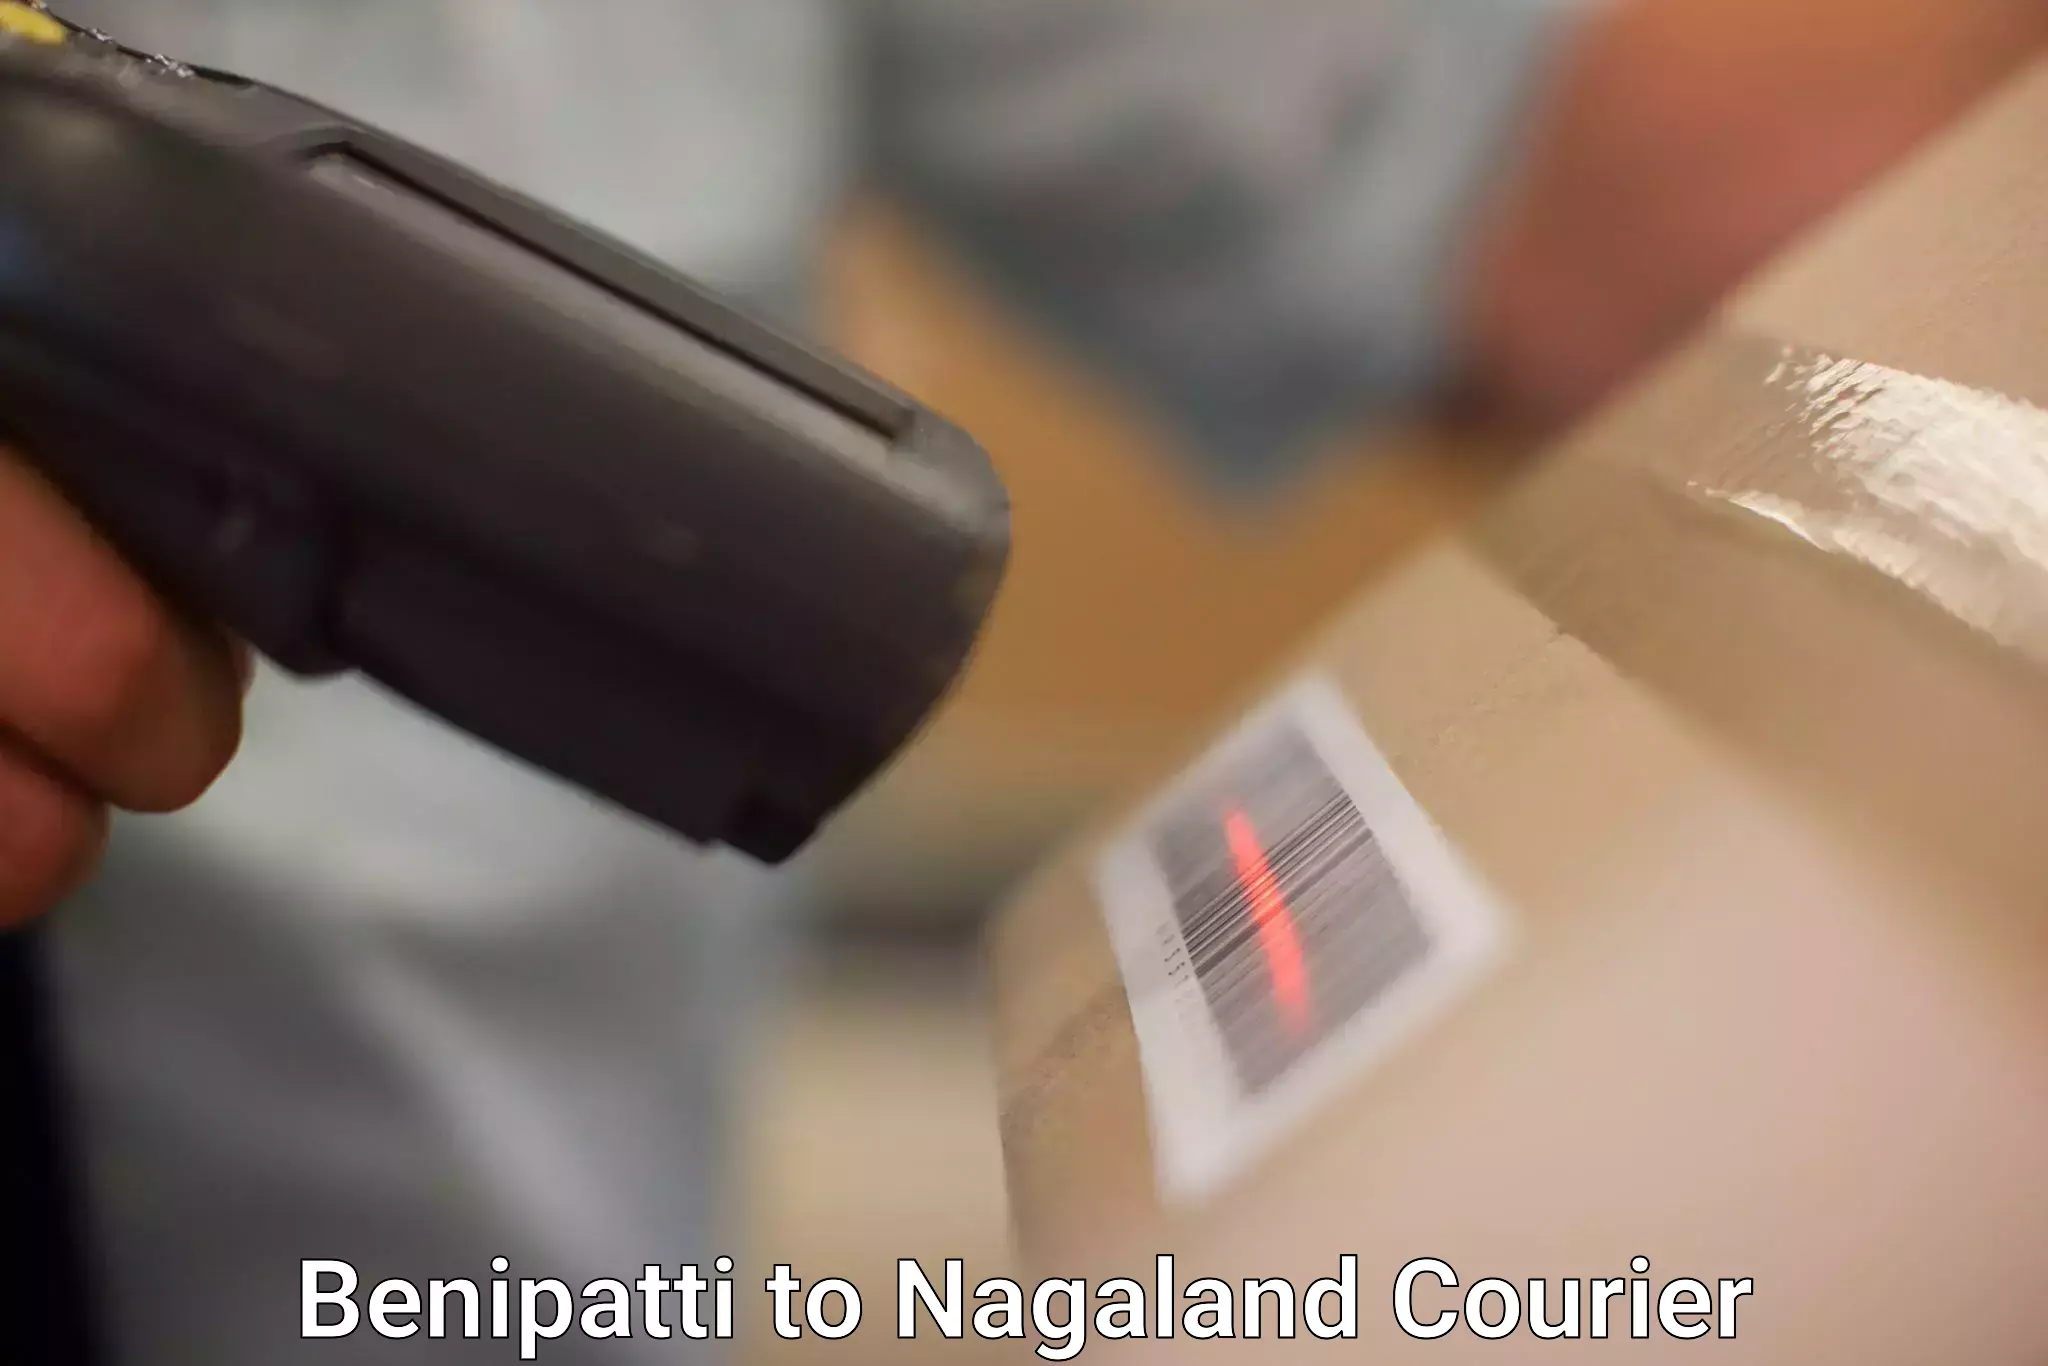 Reliable delivery network Benipatti to Nagaland